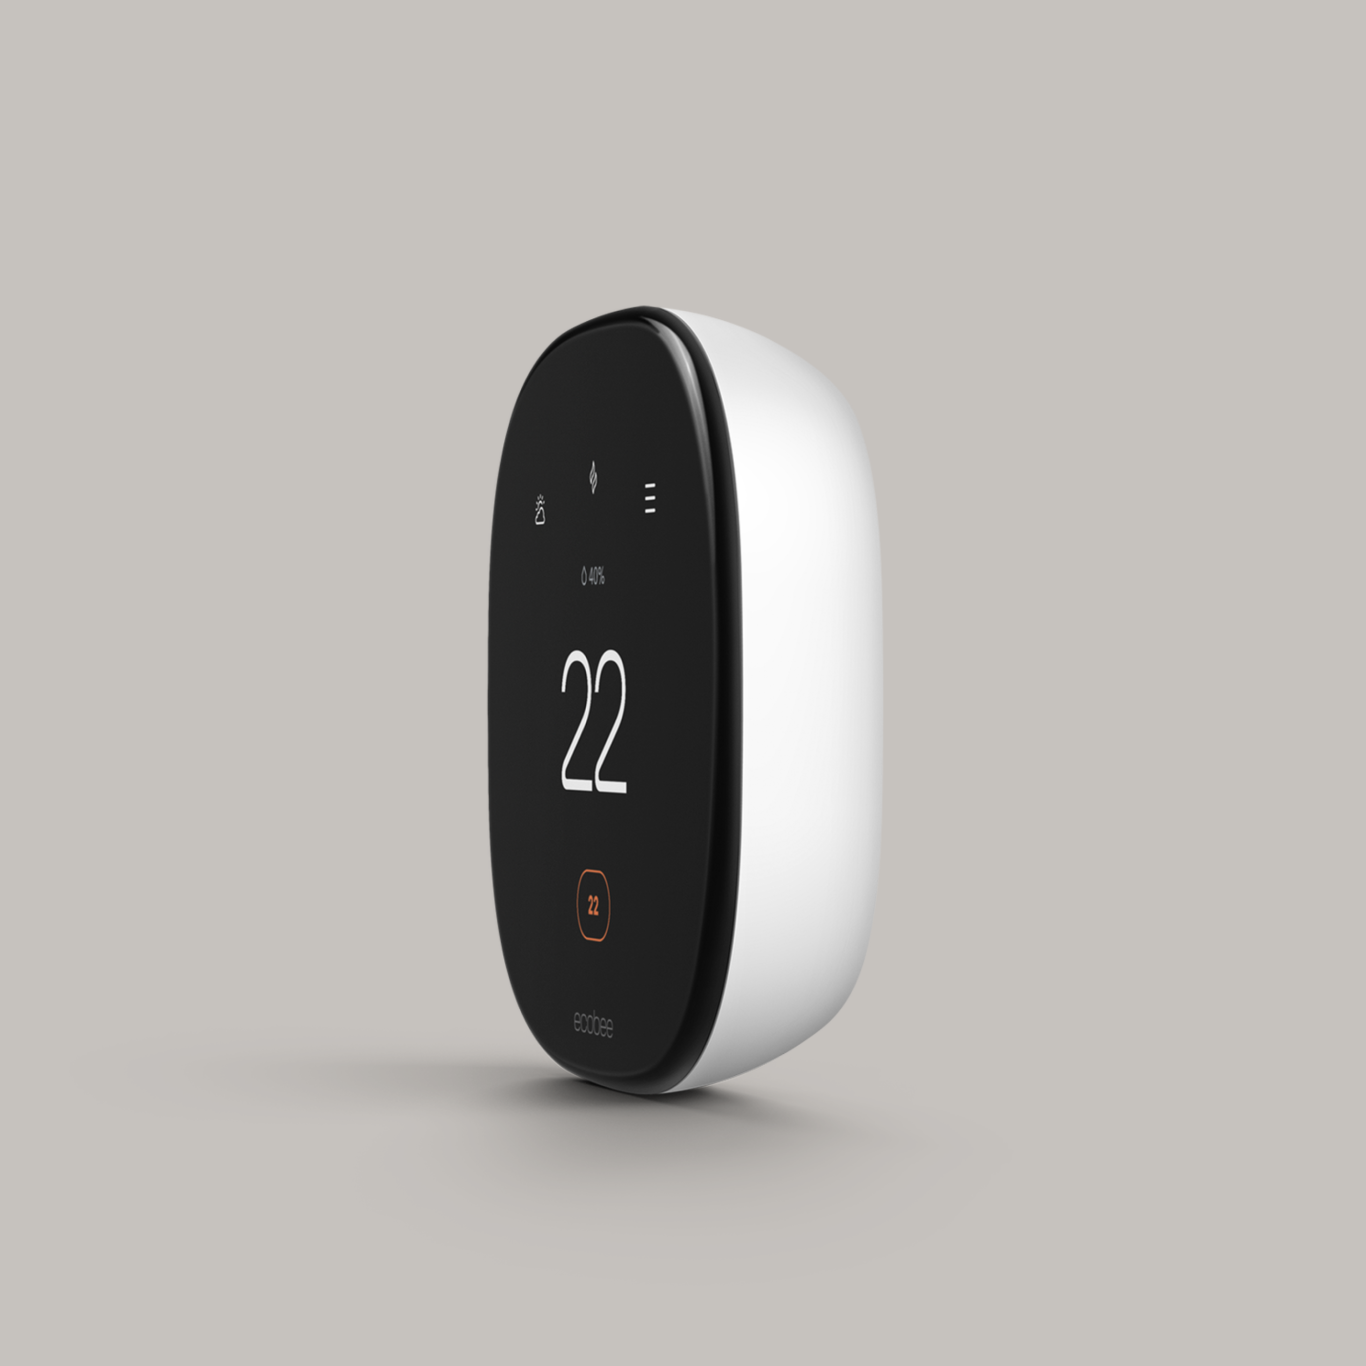 ecobee smart thermostat enhanced on a grey background